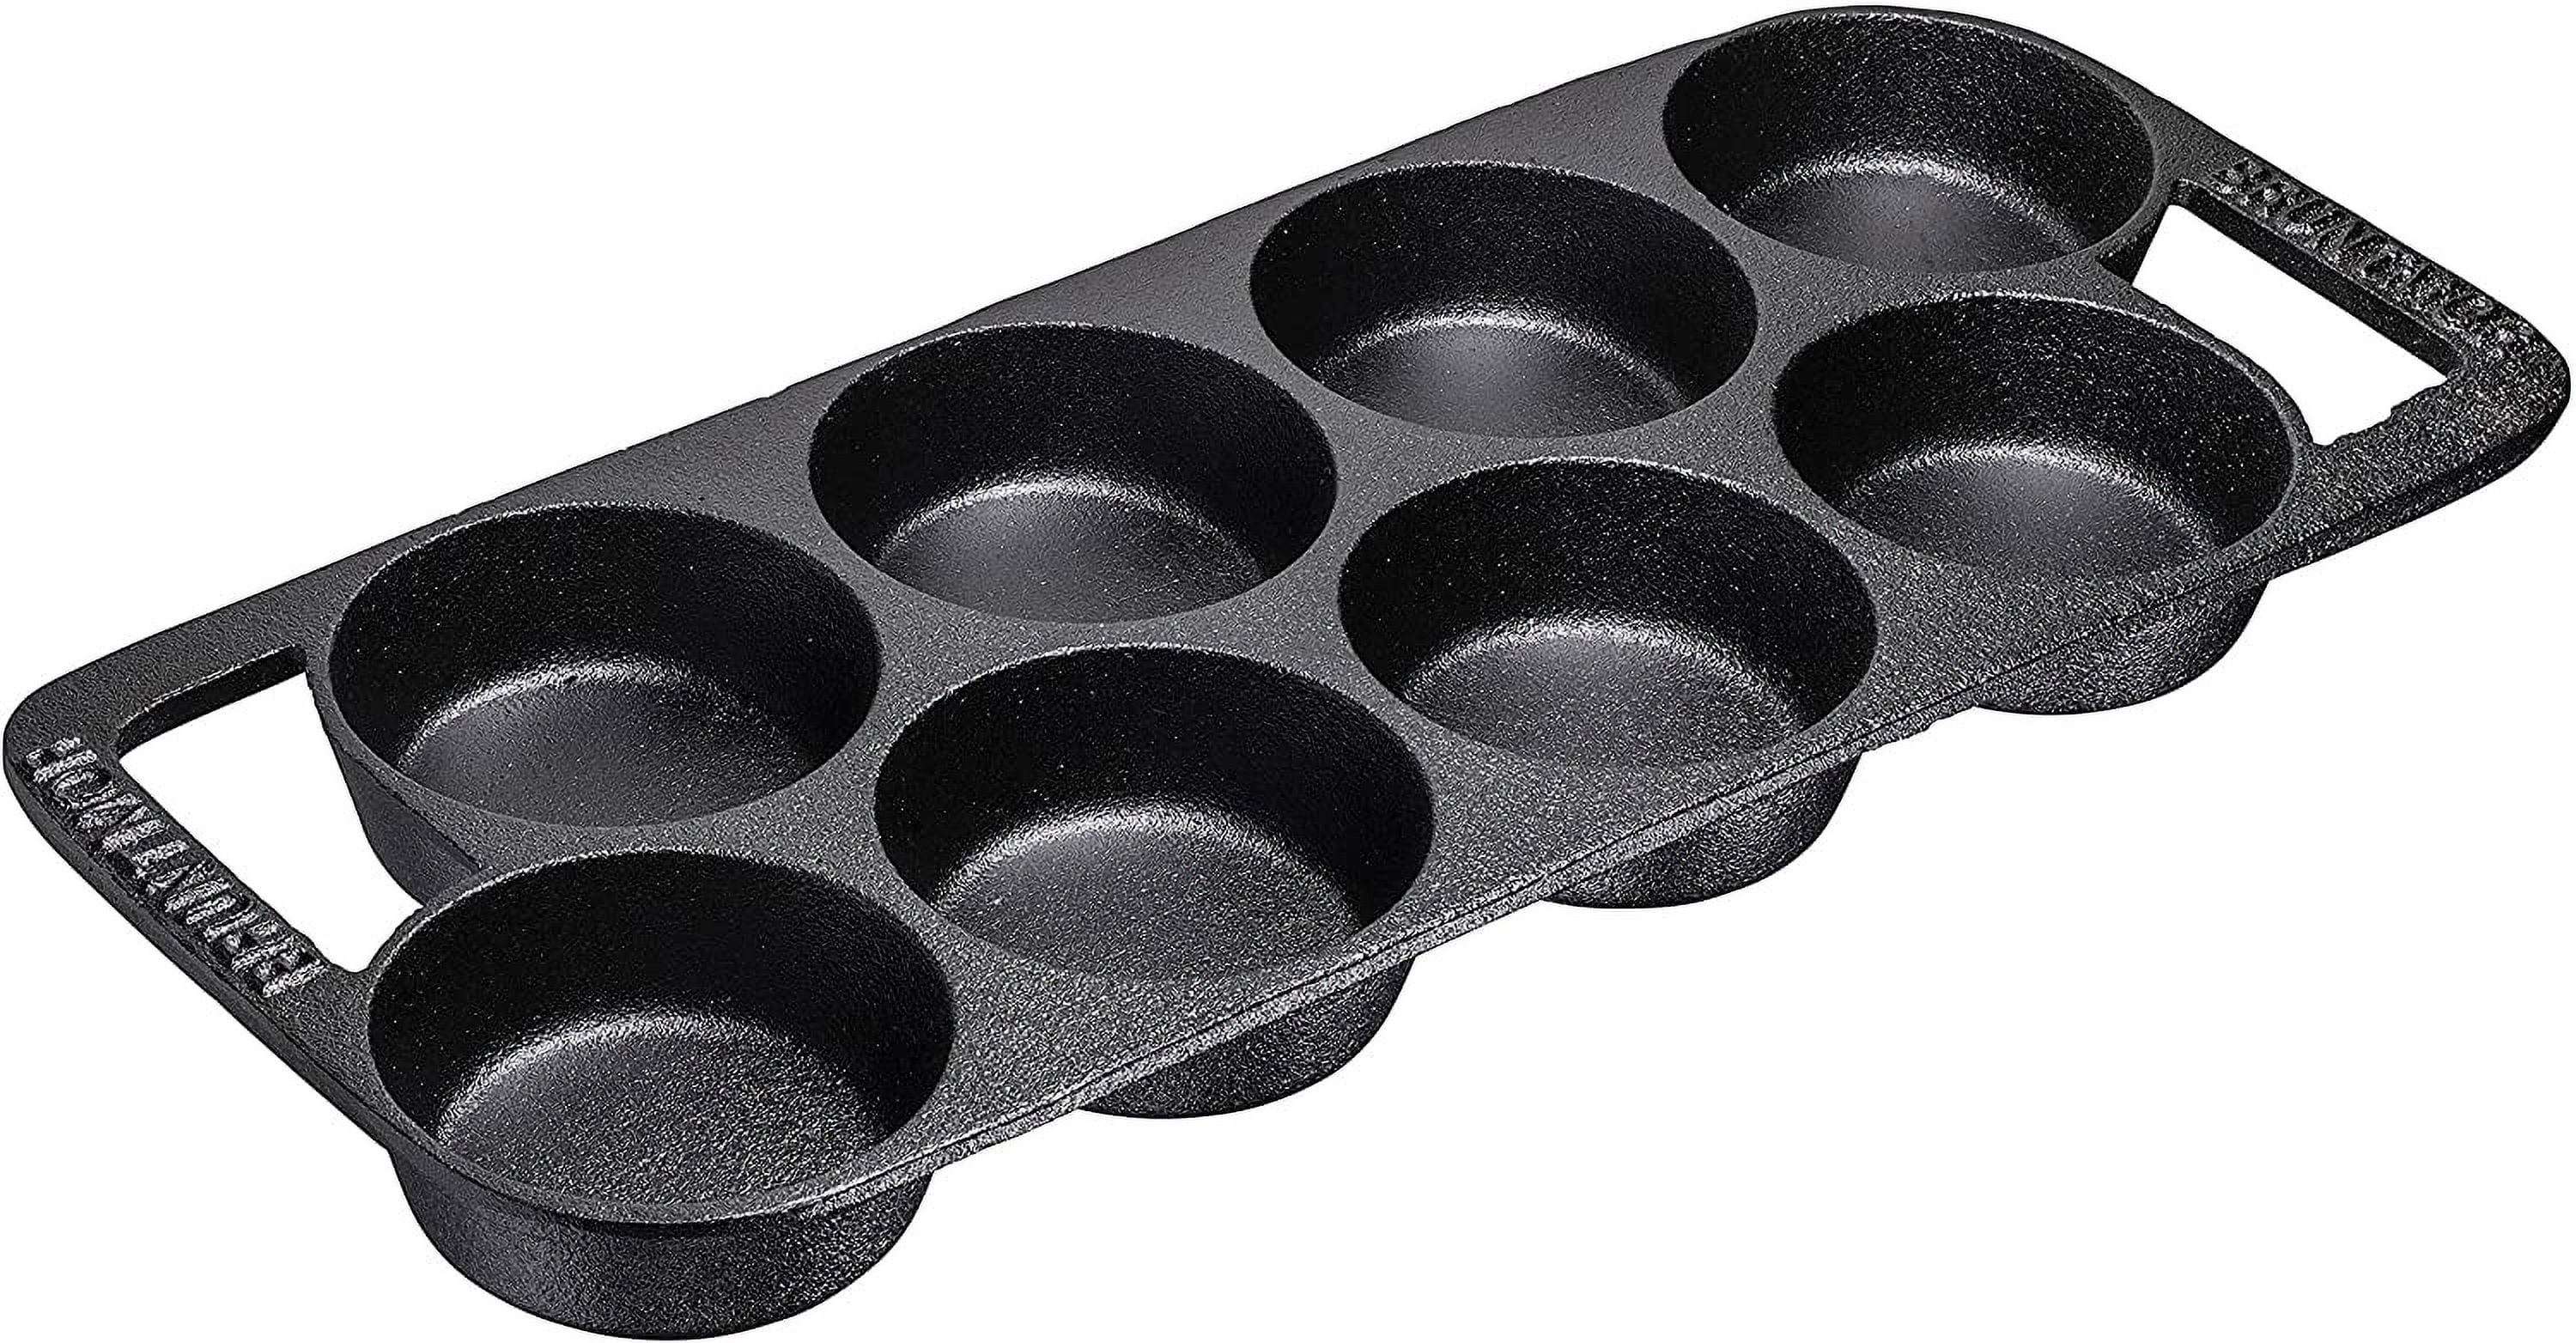 Cast Iron Scone Pan/Cornbread Pan for 8 Wedge Shaped Bakes, Pre-Seasoned -  Comes with Oven Mitts, Silicone Trivet and Oil Brush - by KUHA